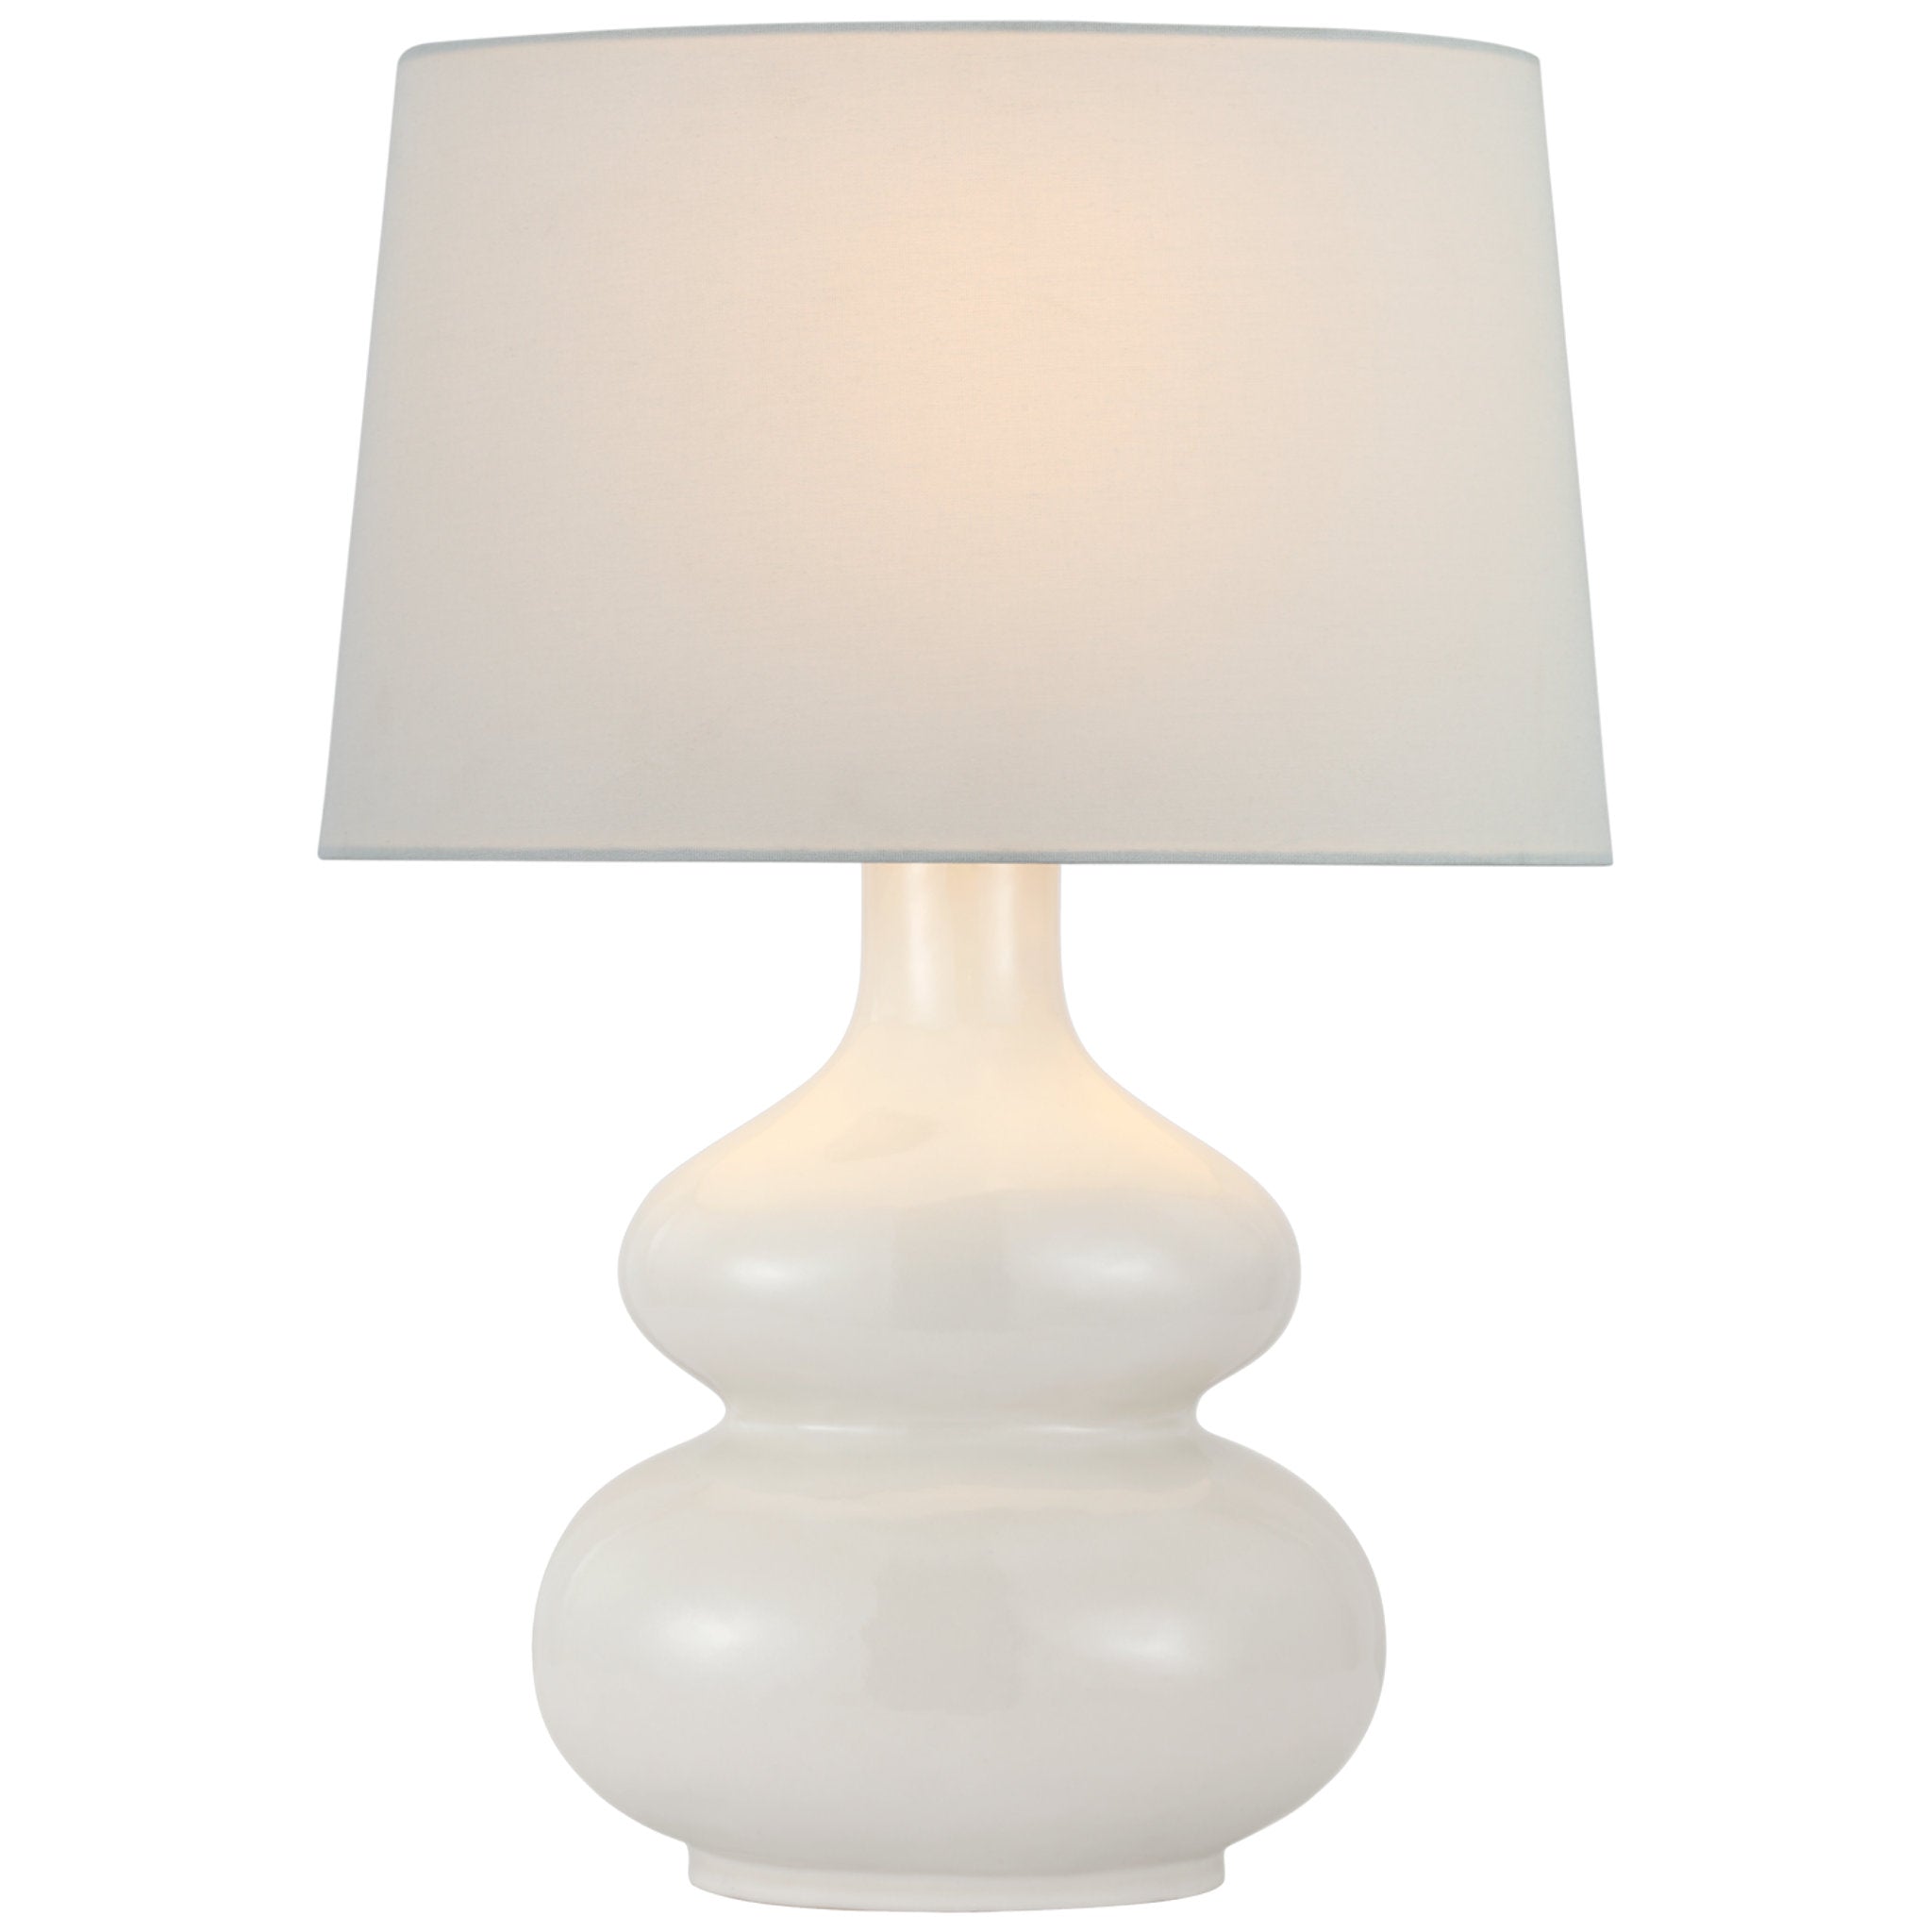 Chapman & Myers Lismore Medium Table Lamp in Ivory with Linen Shade